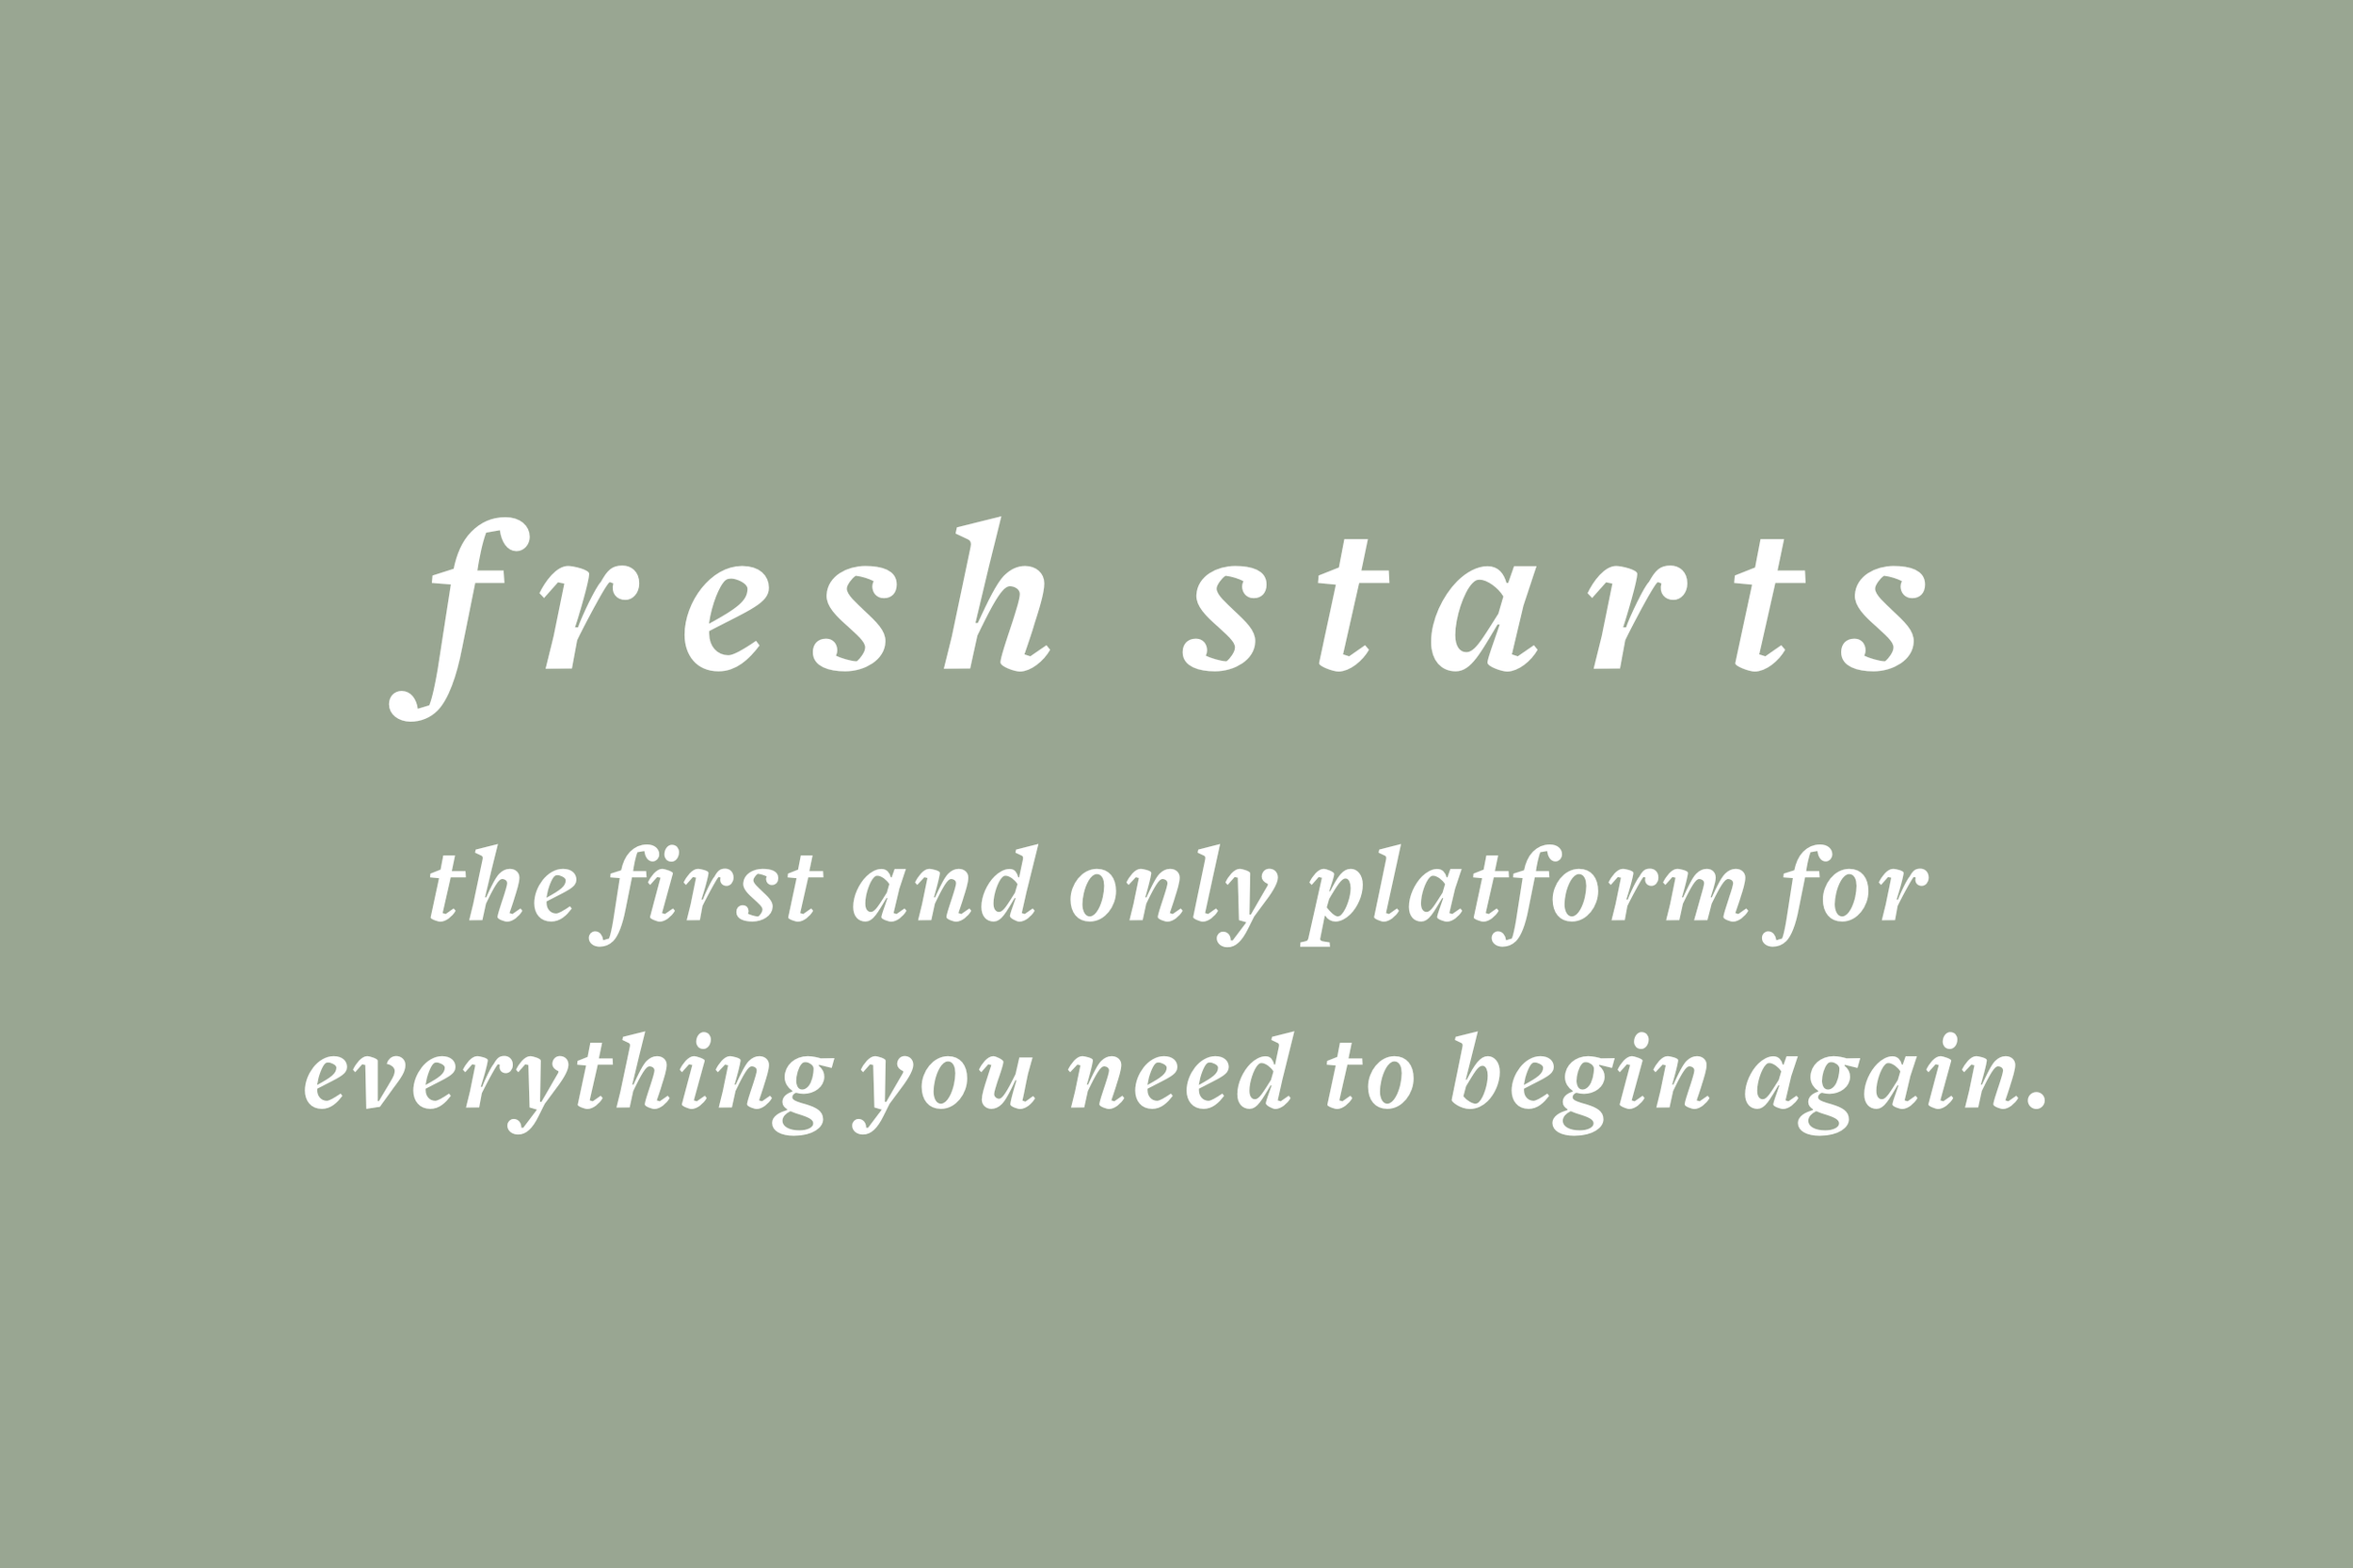 Fresh Starts Registry - the first and only platform for everything